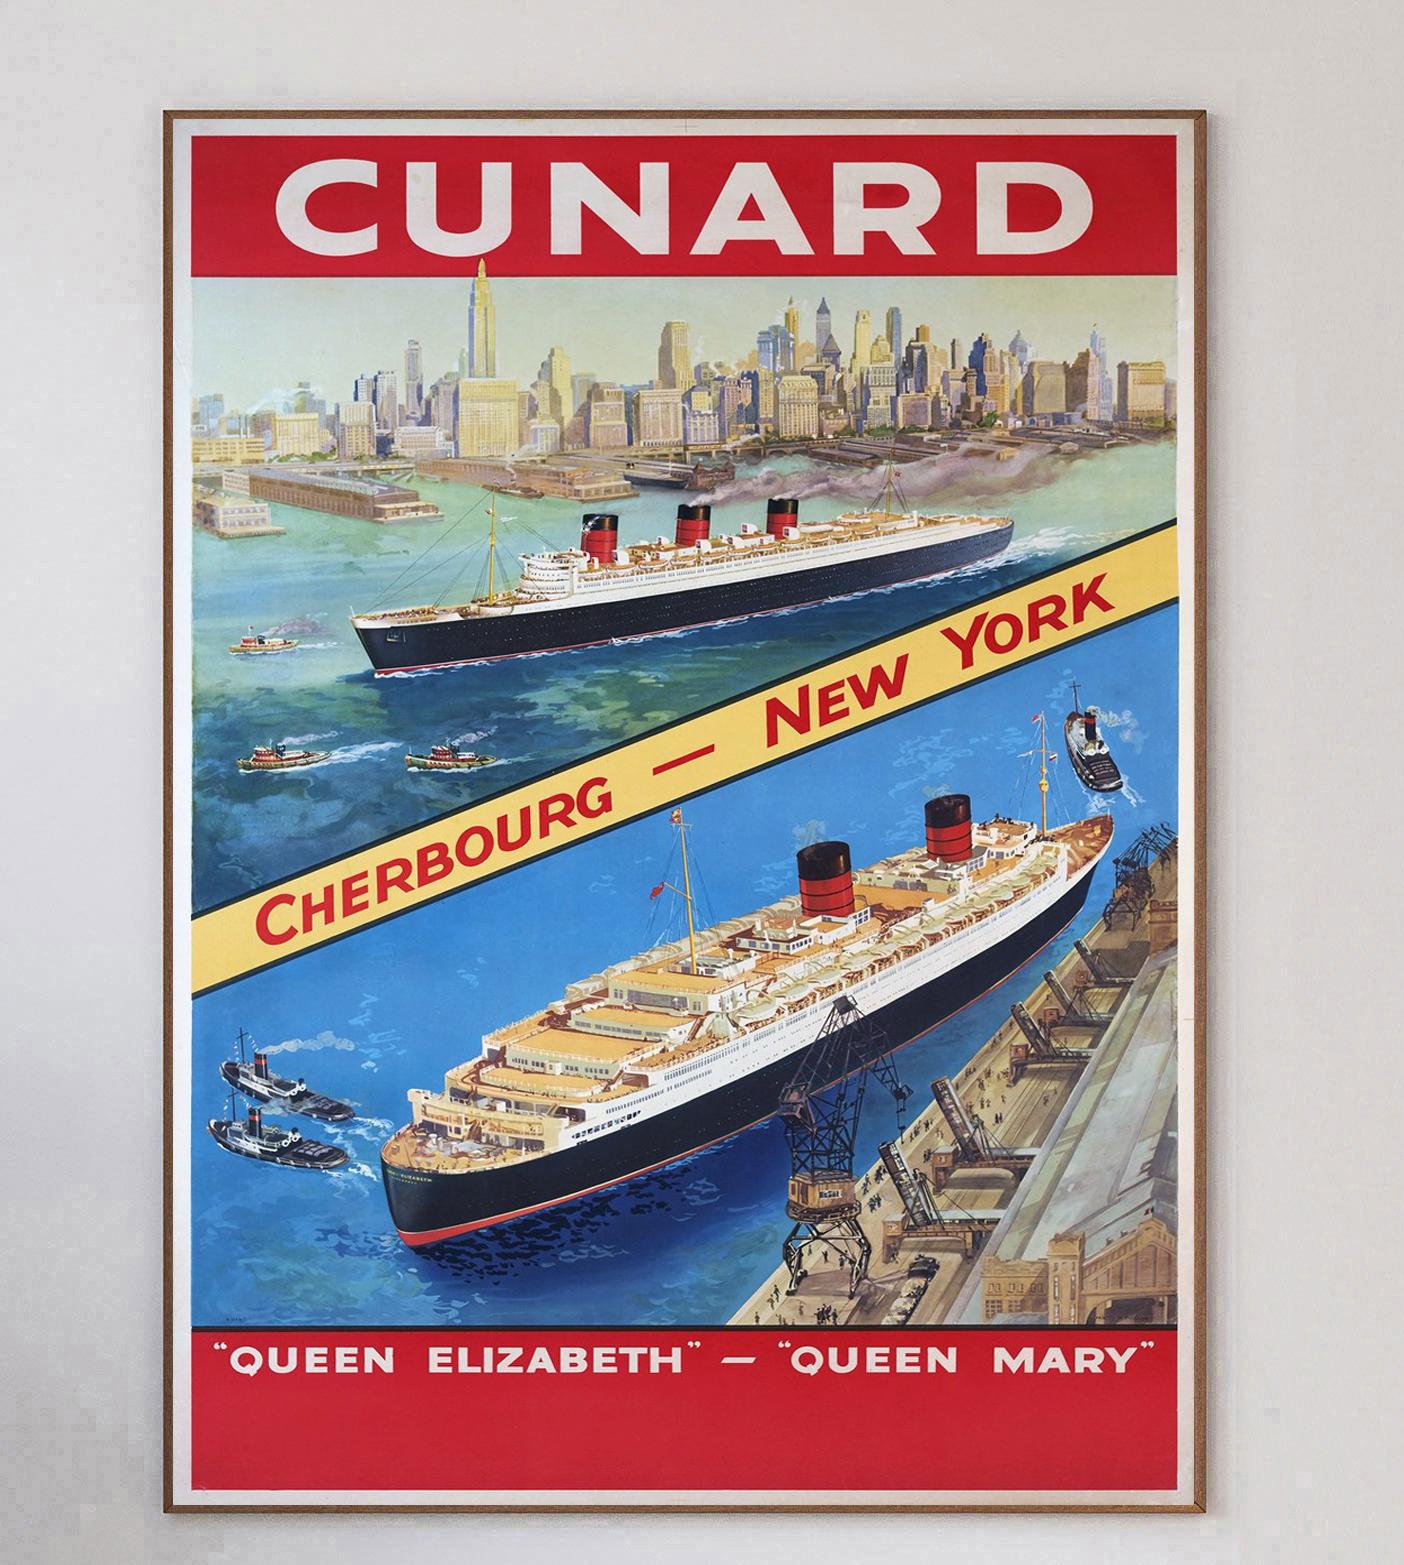 Stunning poster created in 1946 to promote Cunard and their cruises 